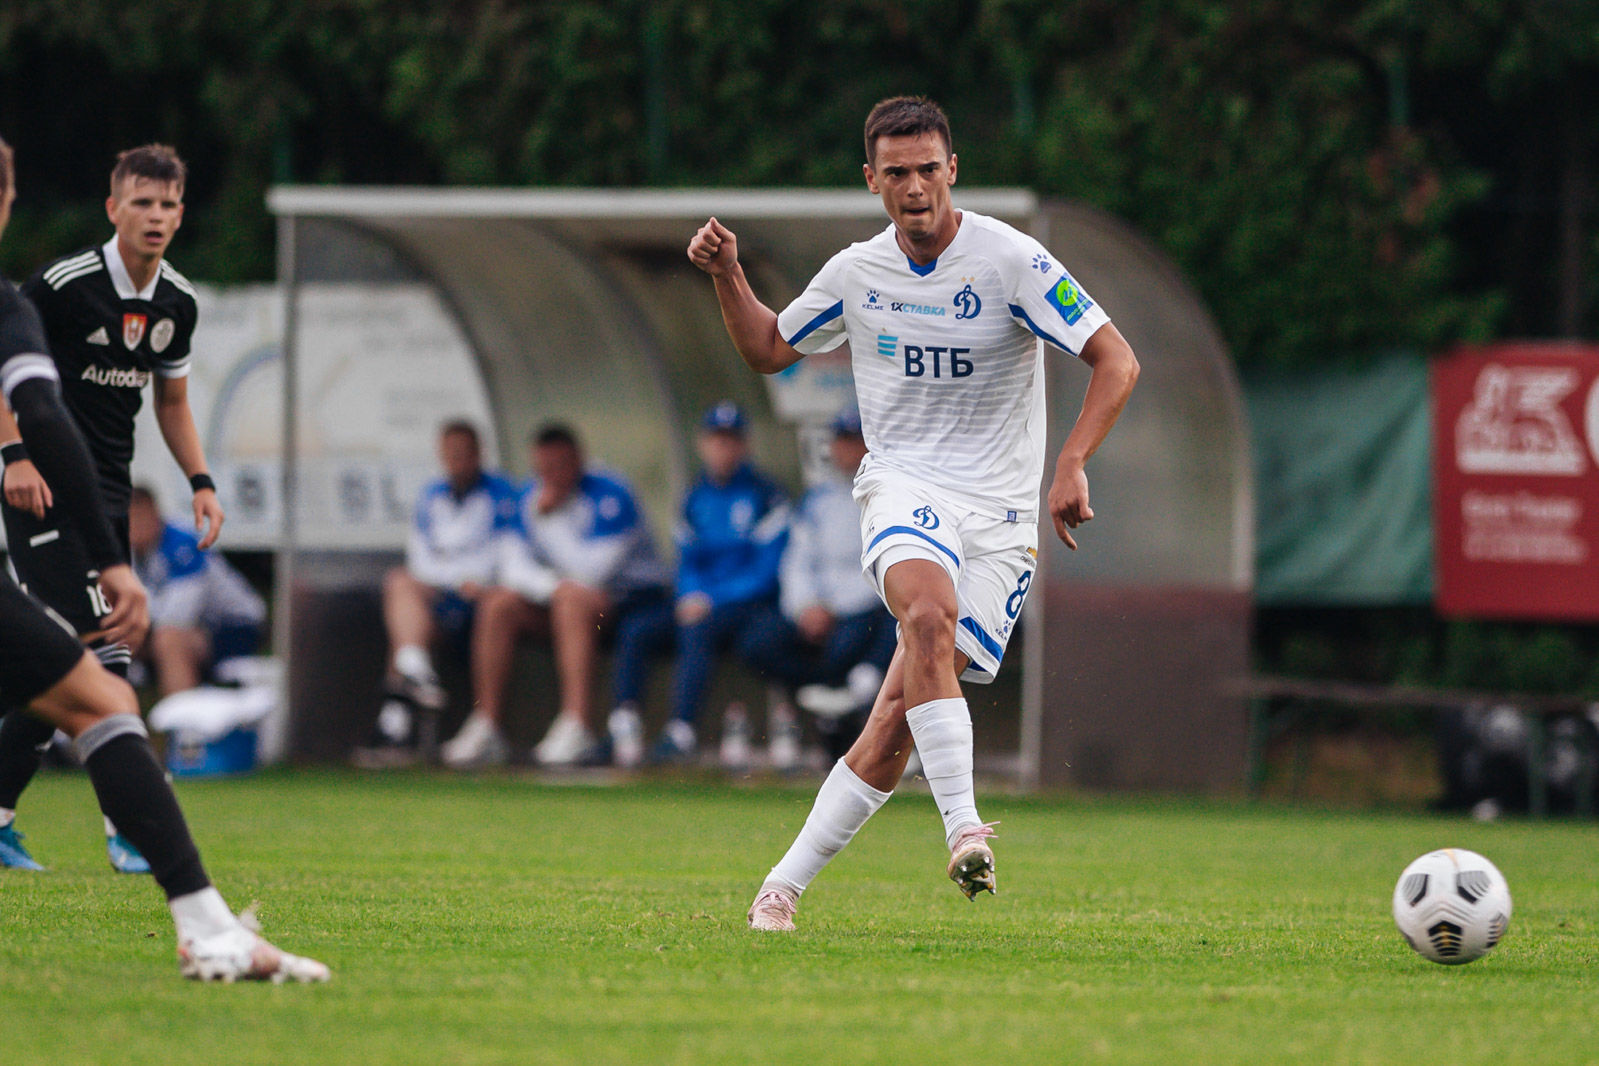 Photo gallery from the friendly match against Dynamo Ceske Budejovice